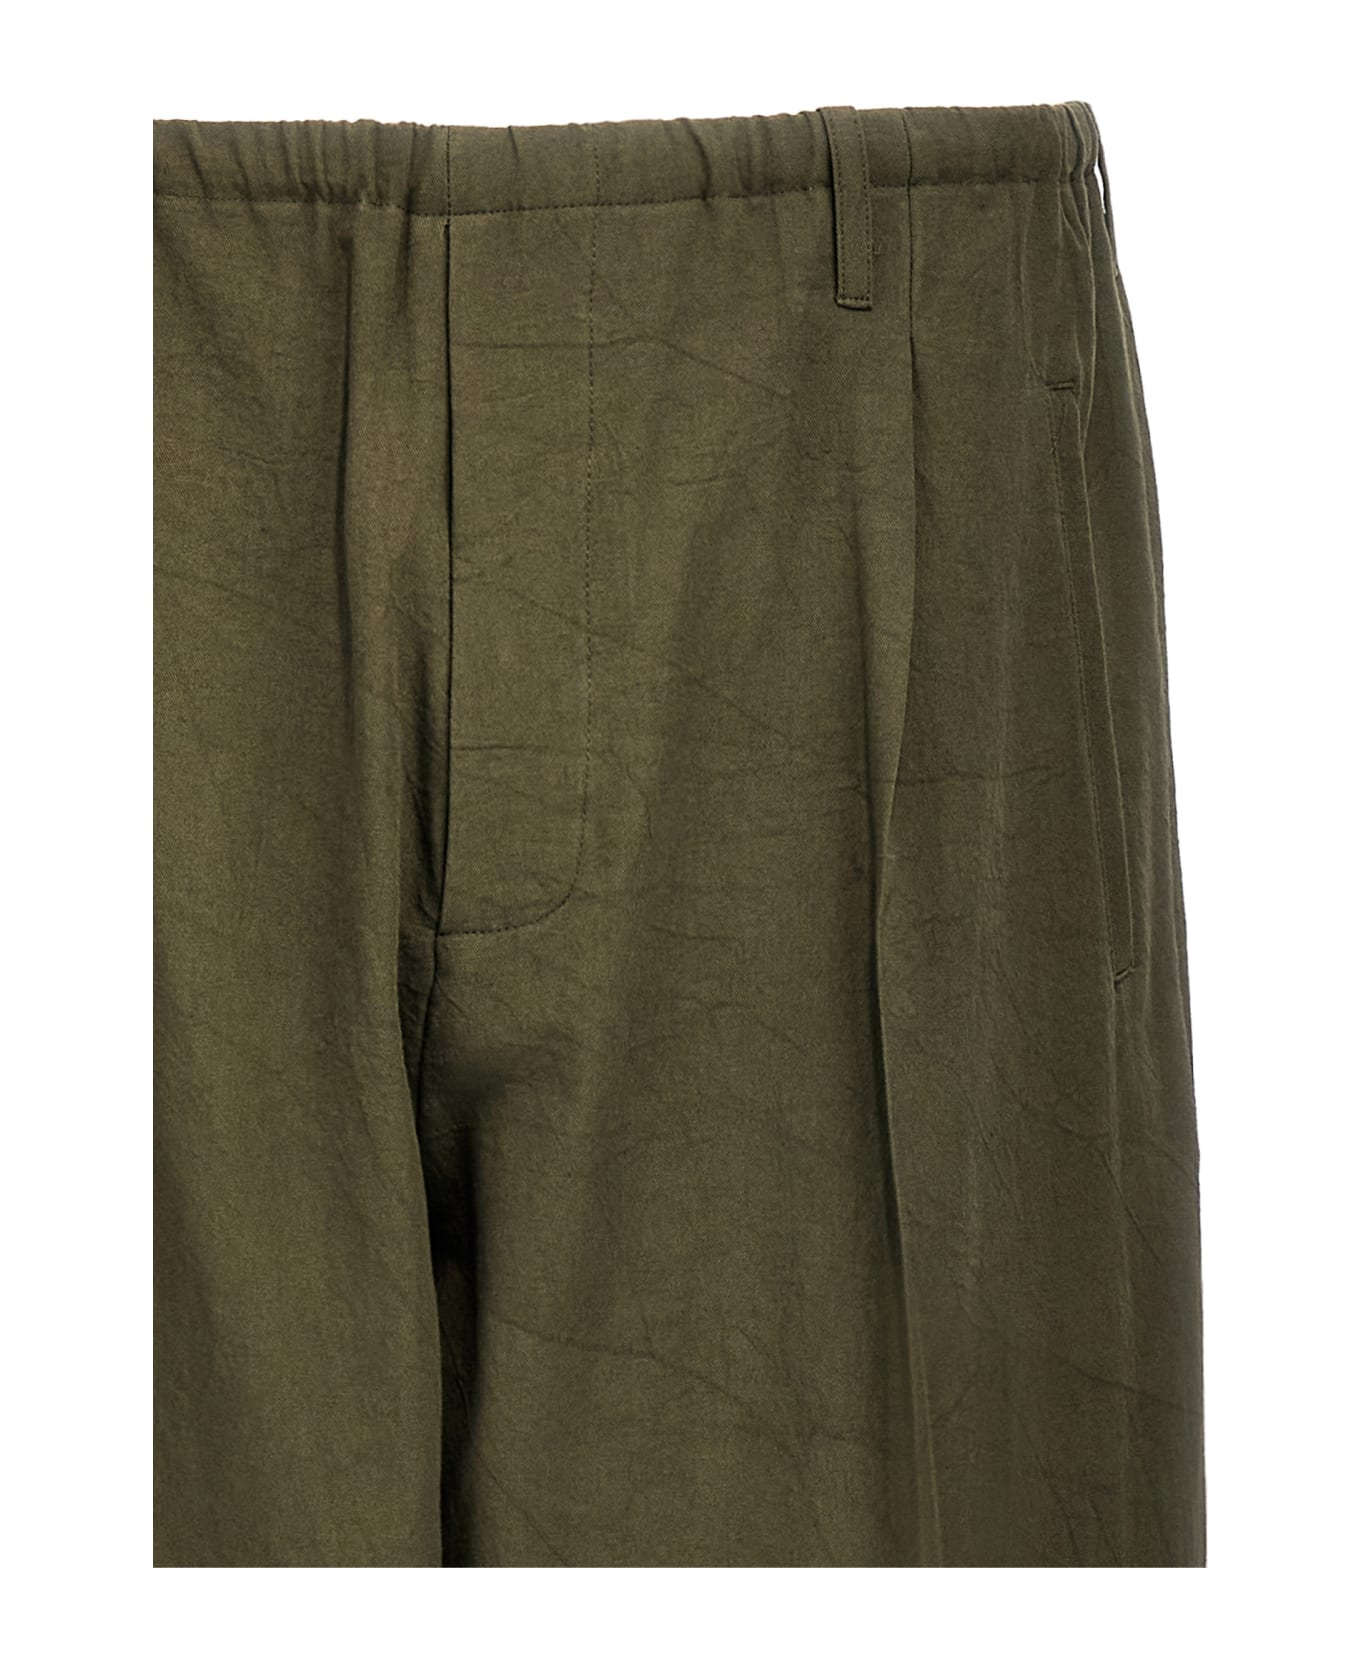 Magliano 'new People's' Pants - BROWN